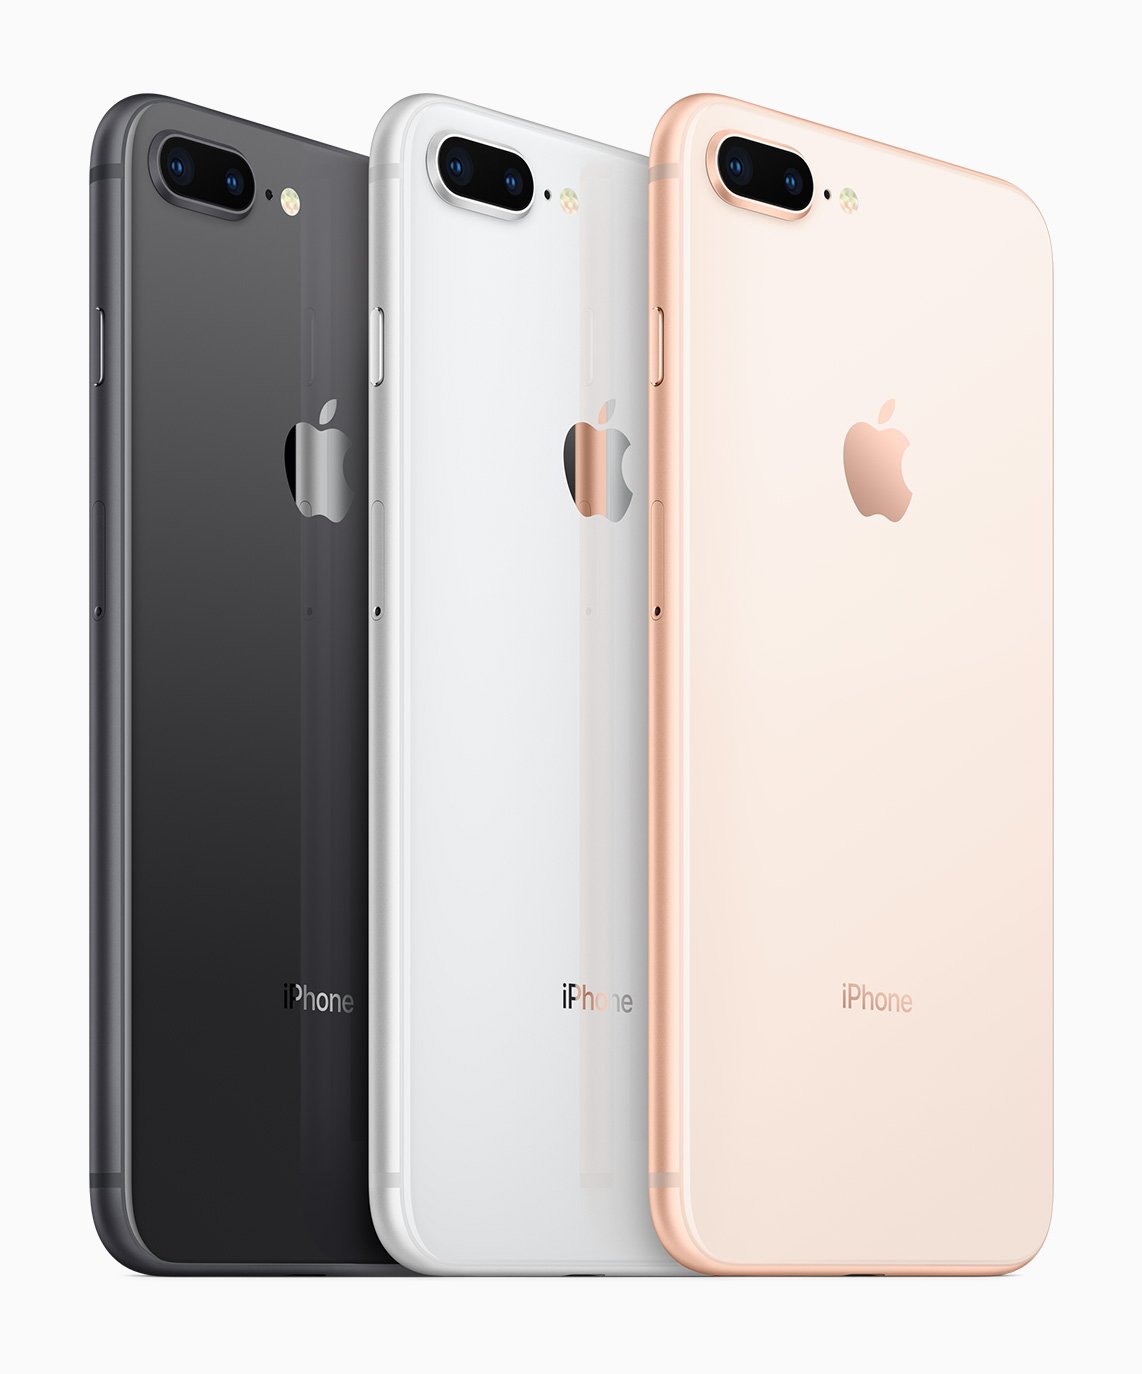 iPhone8Plus_color_selection.jpg